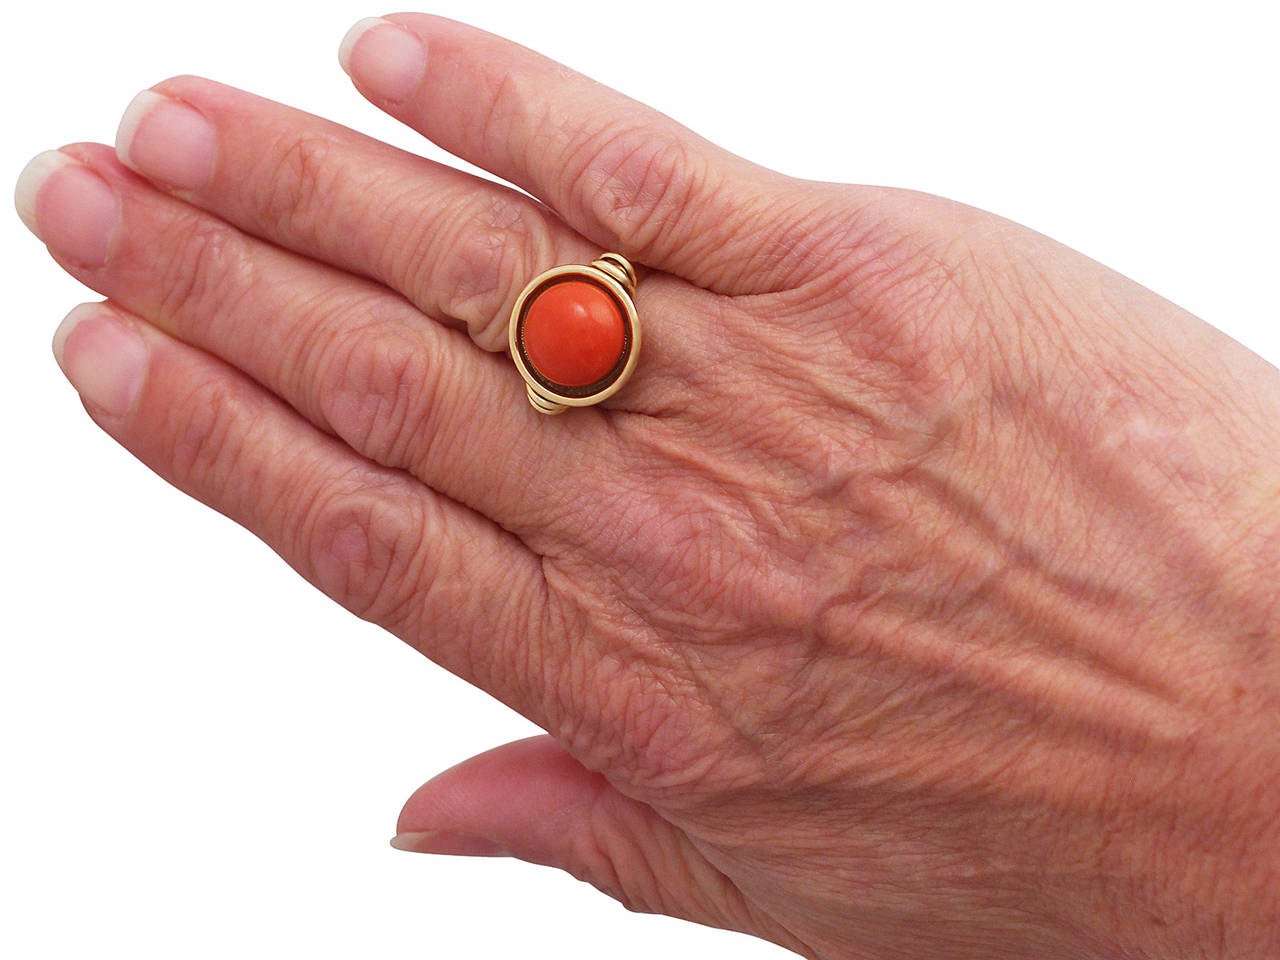 Women's Red Coral and 14k Yellow Gold Ring - Art Deco Style - Vintage Circa 1940